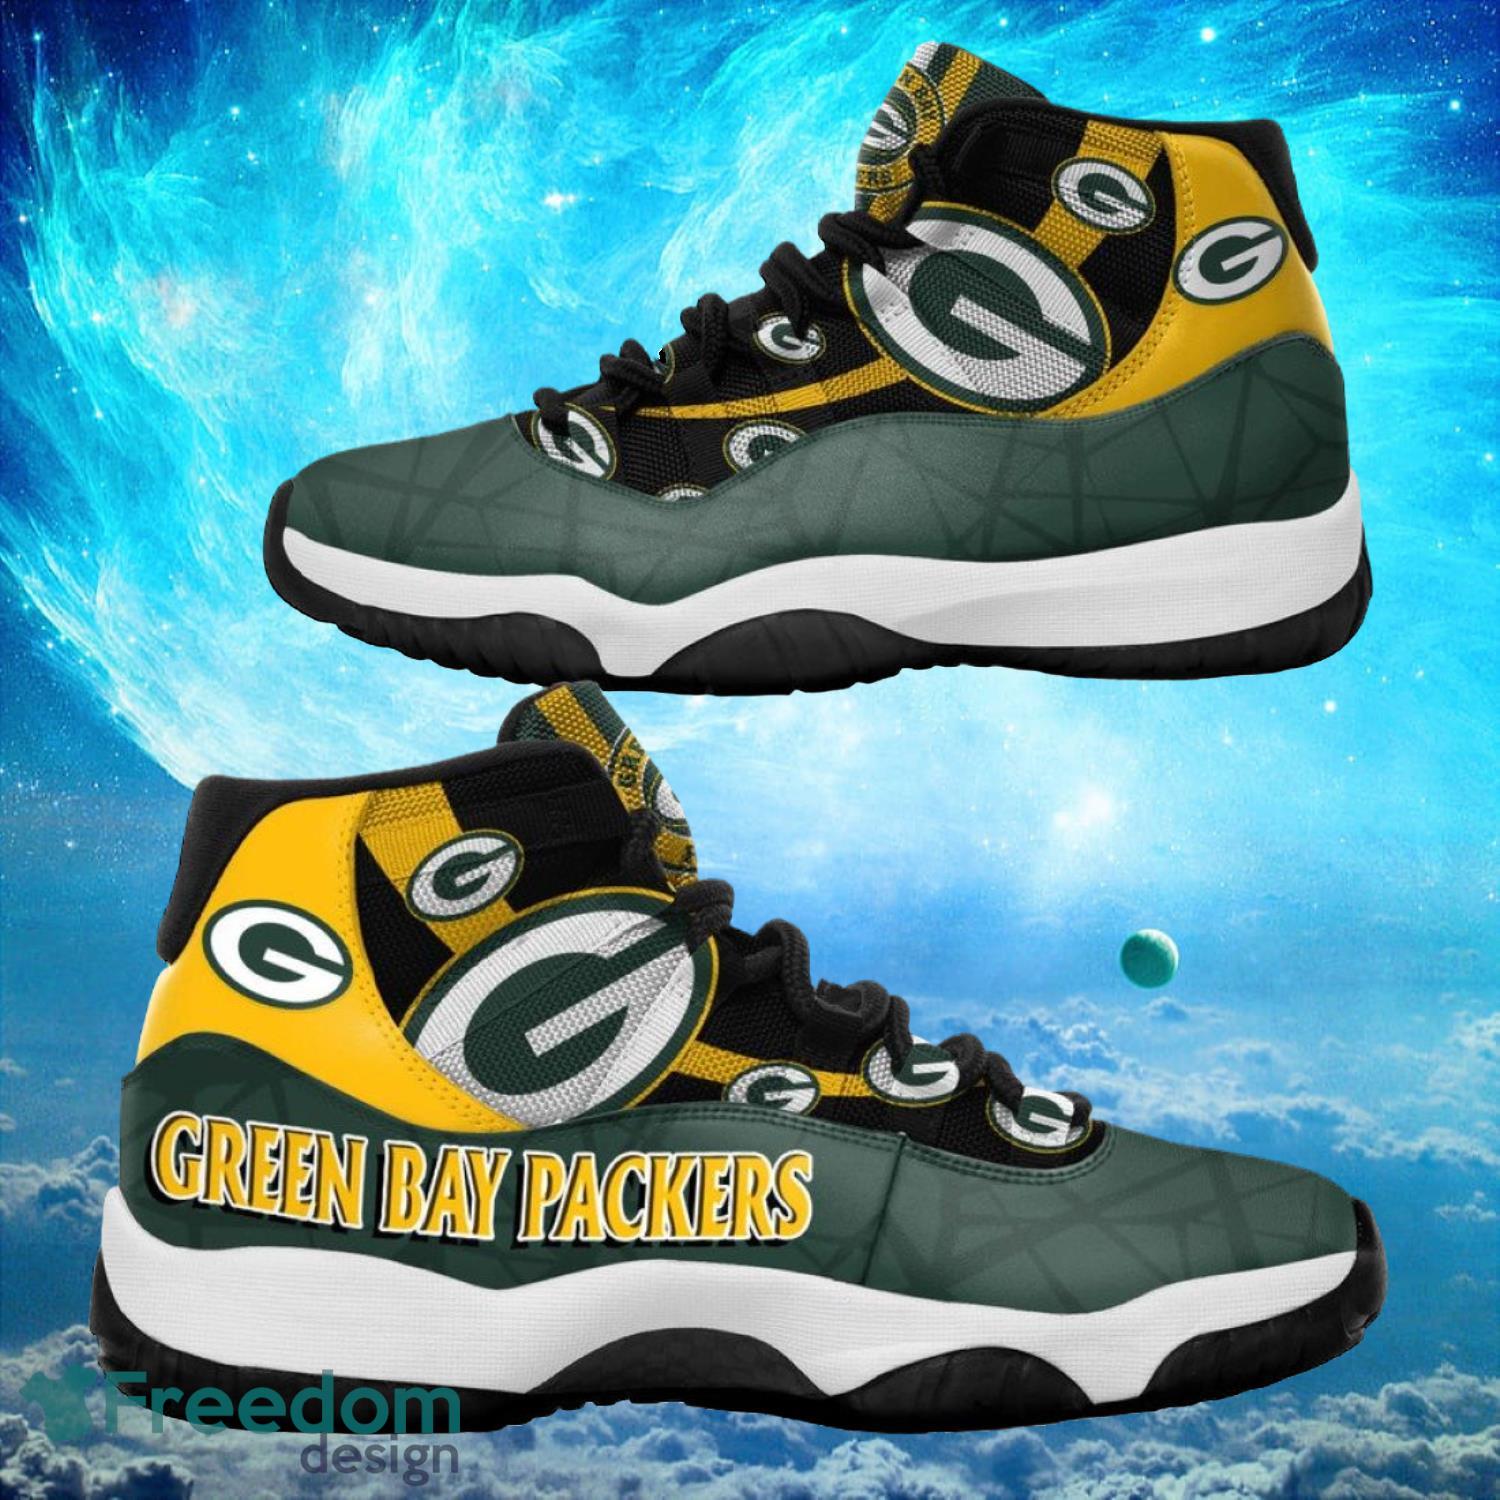 Green Bay Packers NFL Air Jordan 11 Sneakers Shoes Gift For Fans Product Photo 1